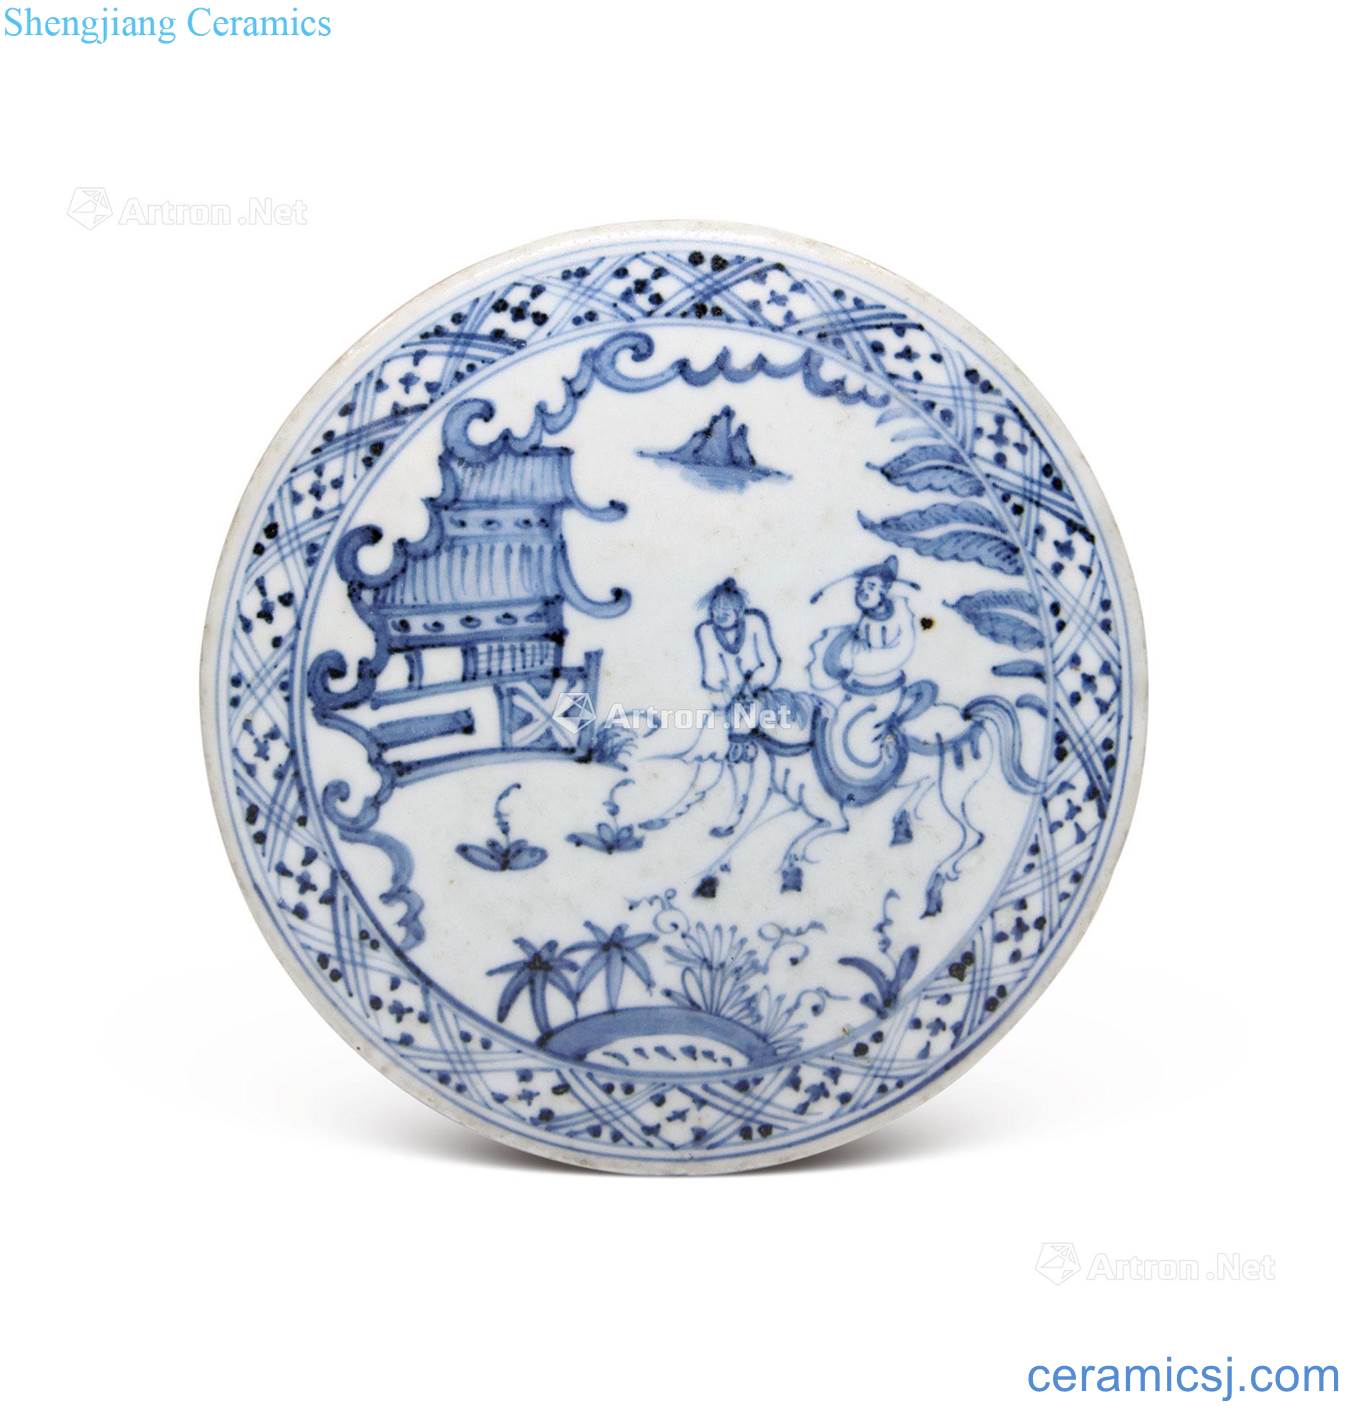 Ming dynasty Blue and white porcelain pieces